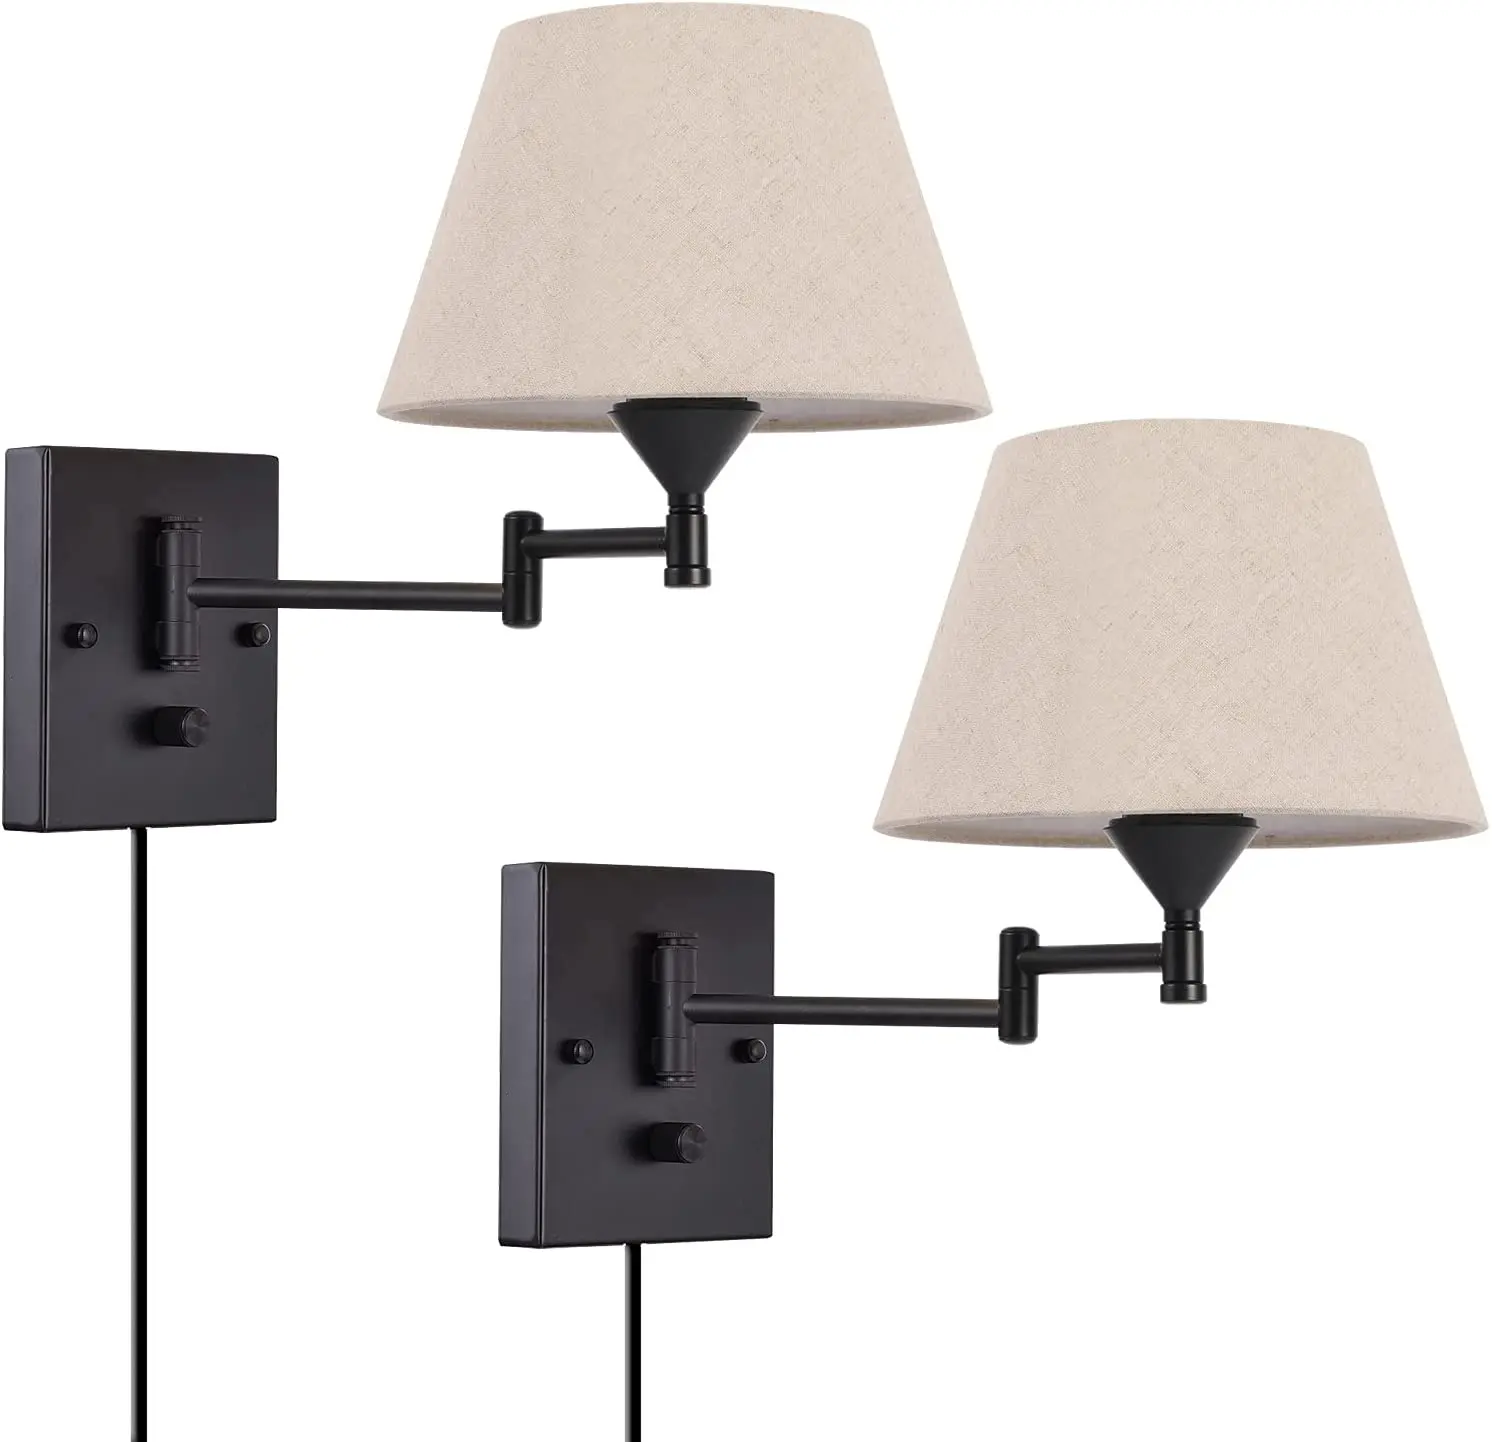 2 wall lamps (adjustable rocker arm   with power cord plug) bedroom curtain